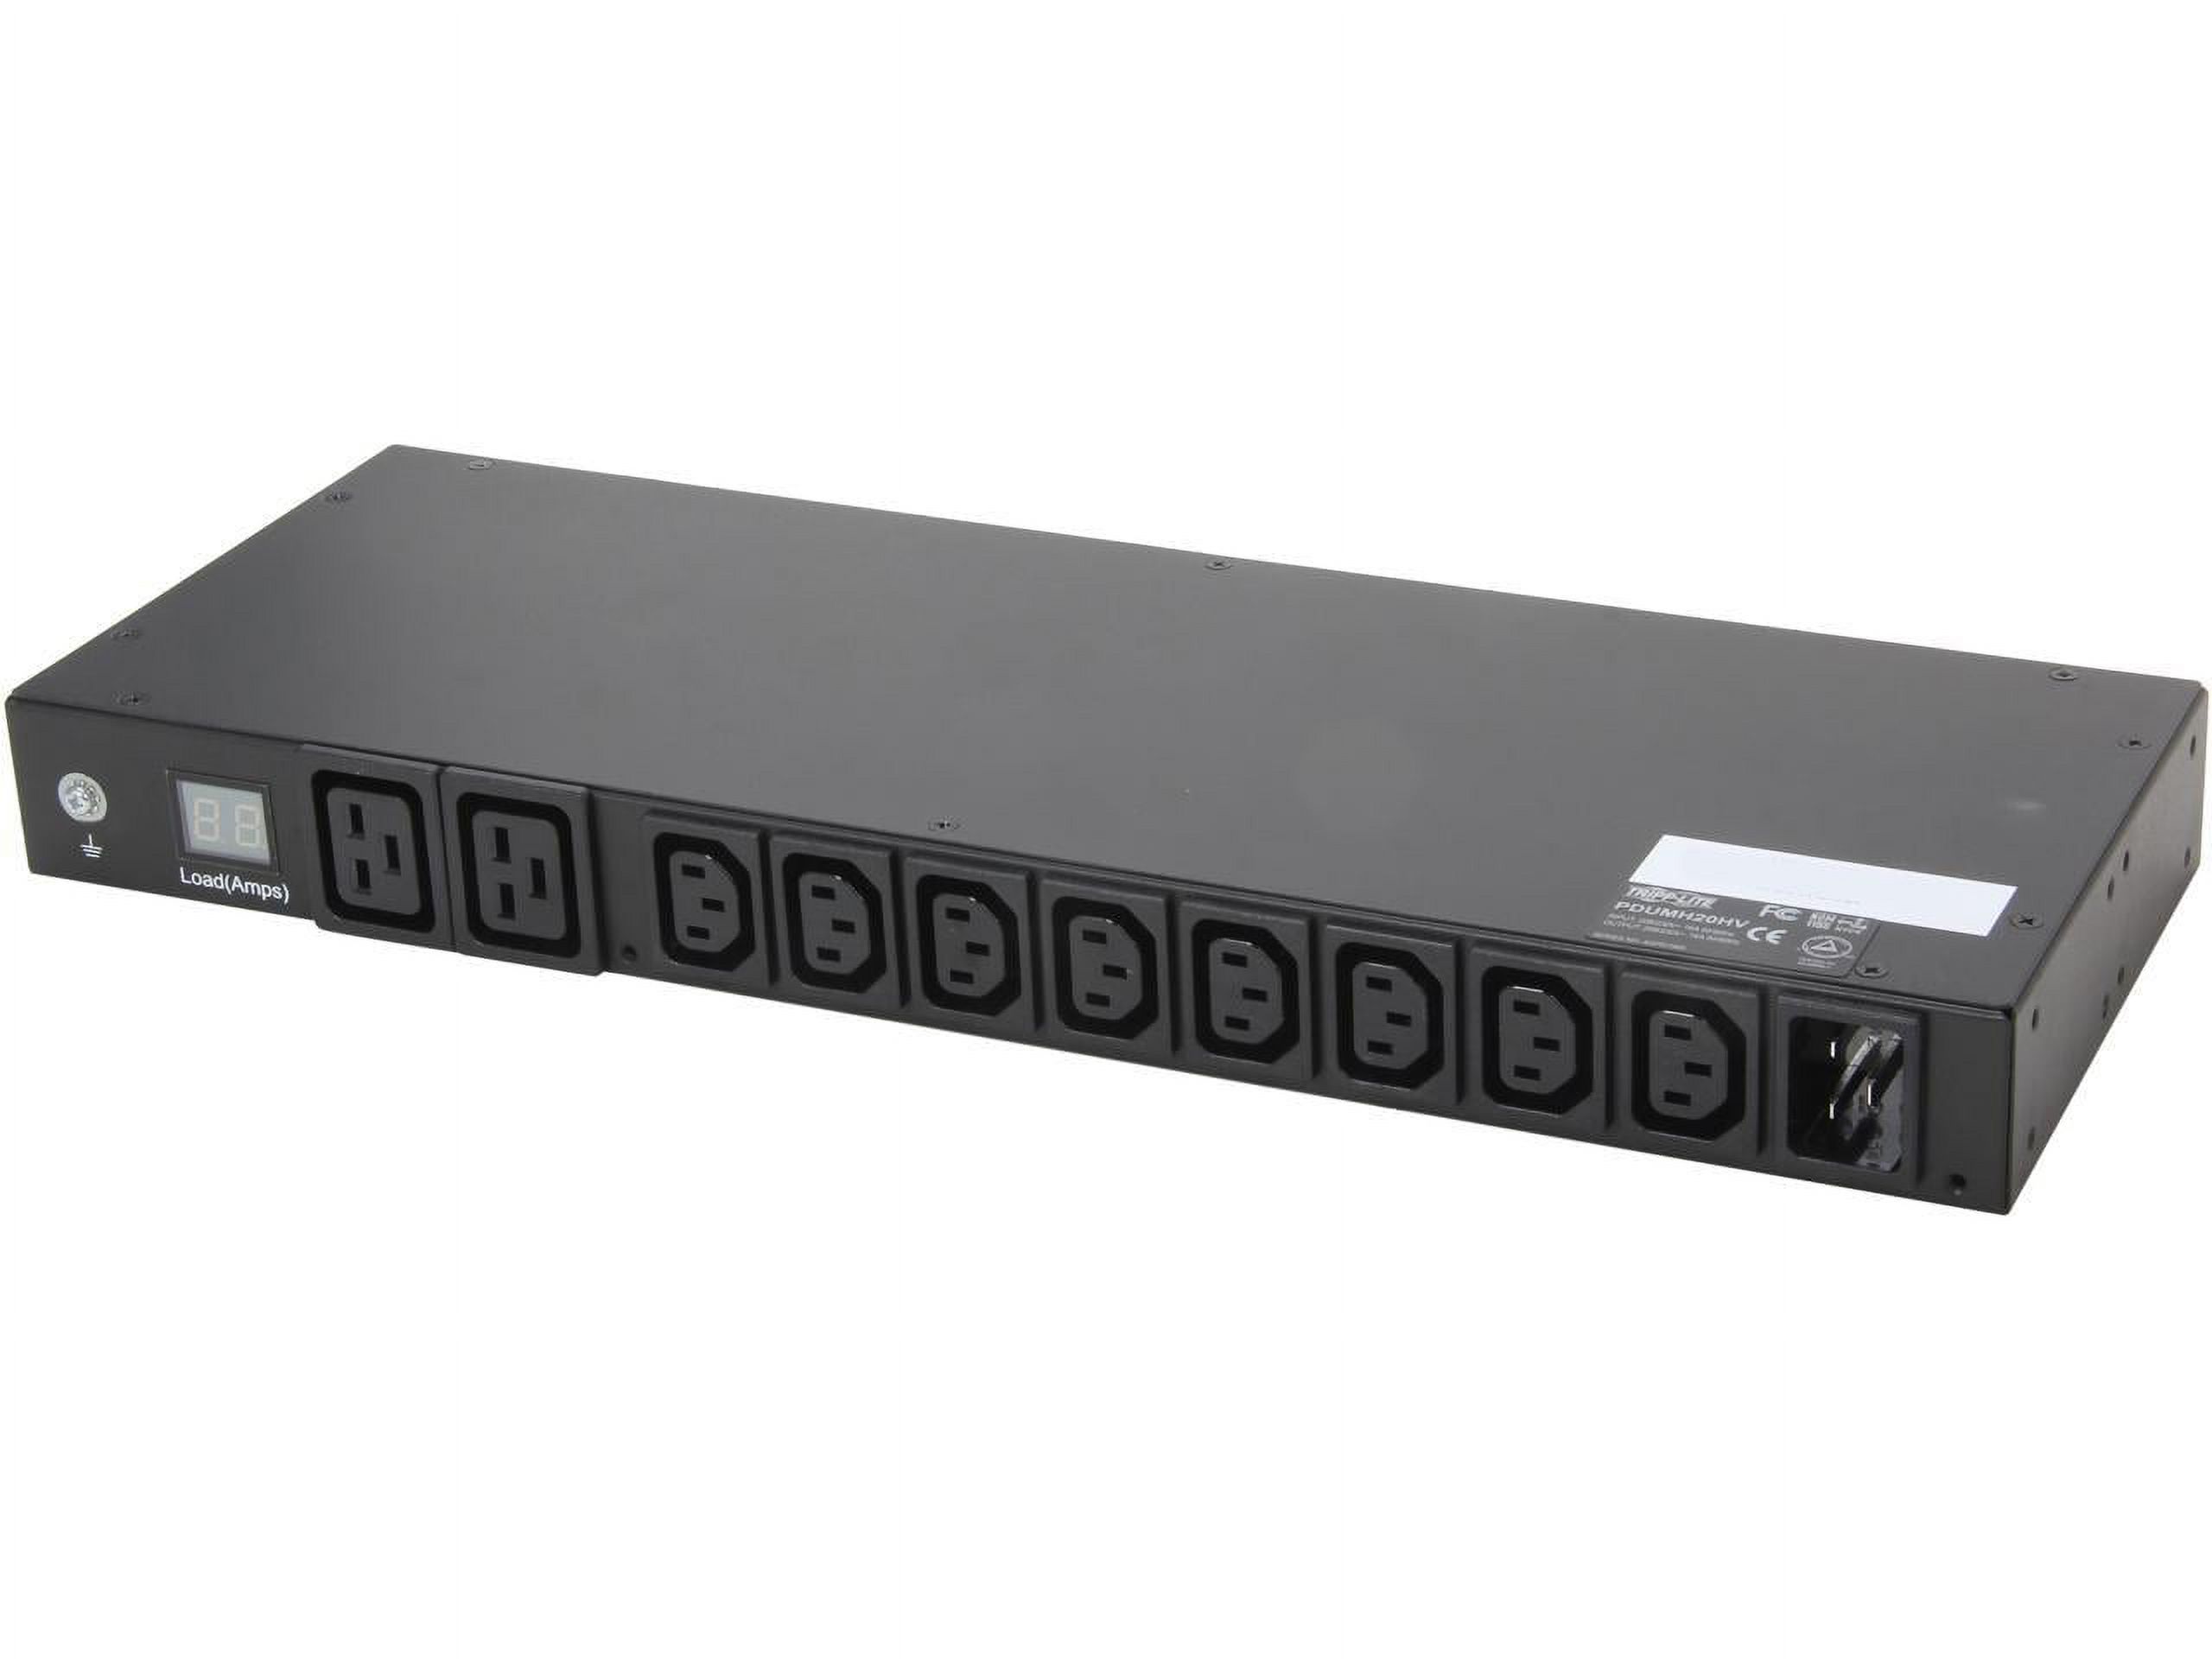 Tripp Lite Metered 10-Outlets PDU - image 1 of 4